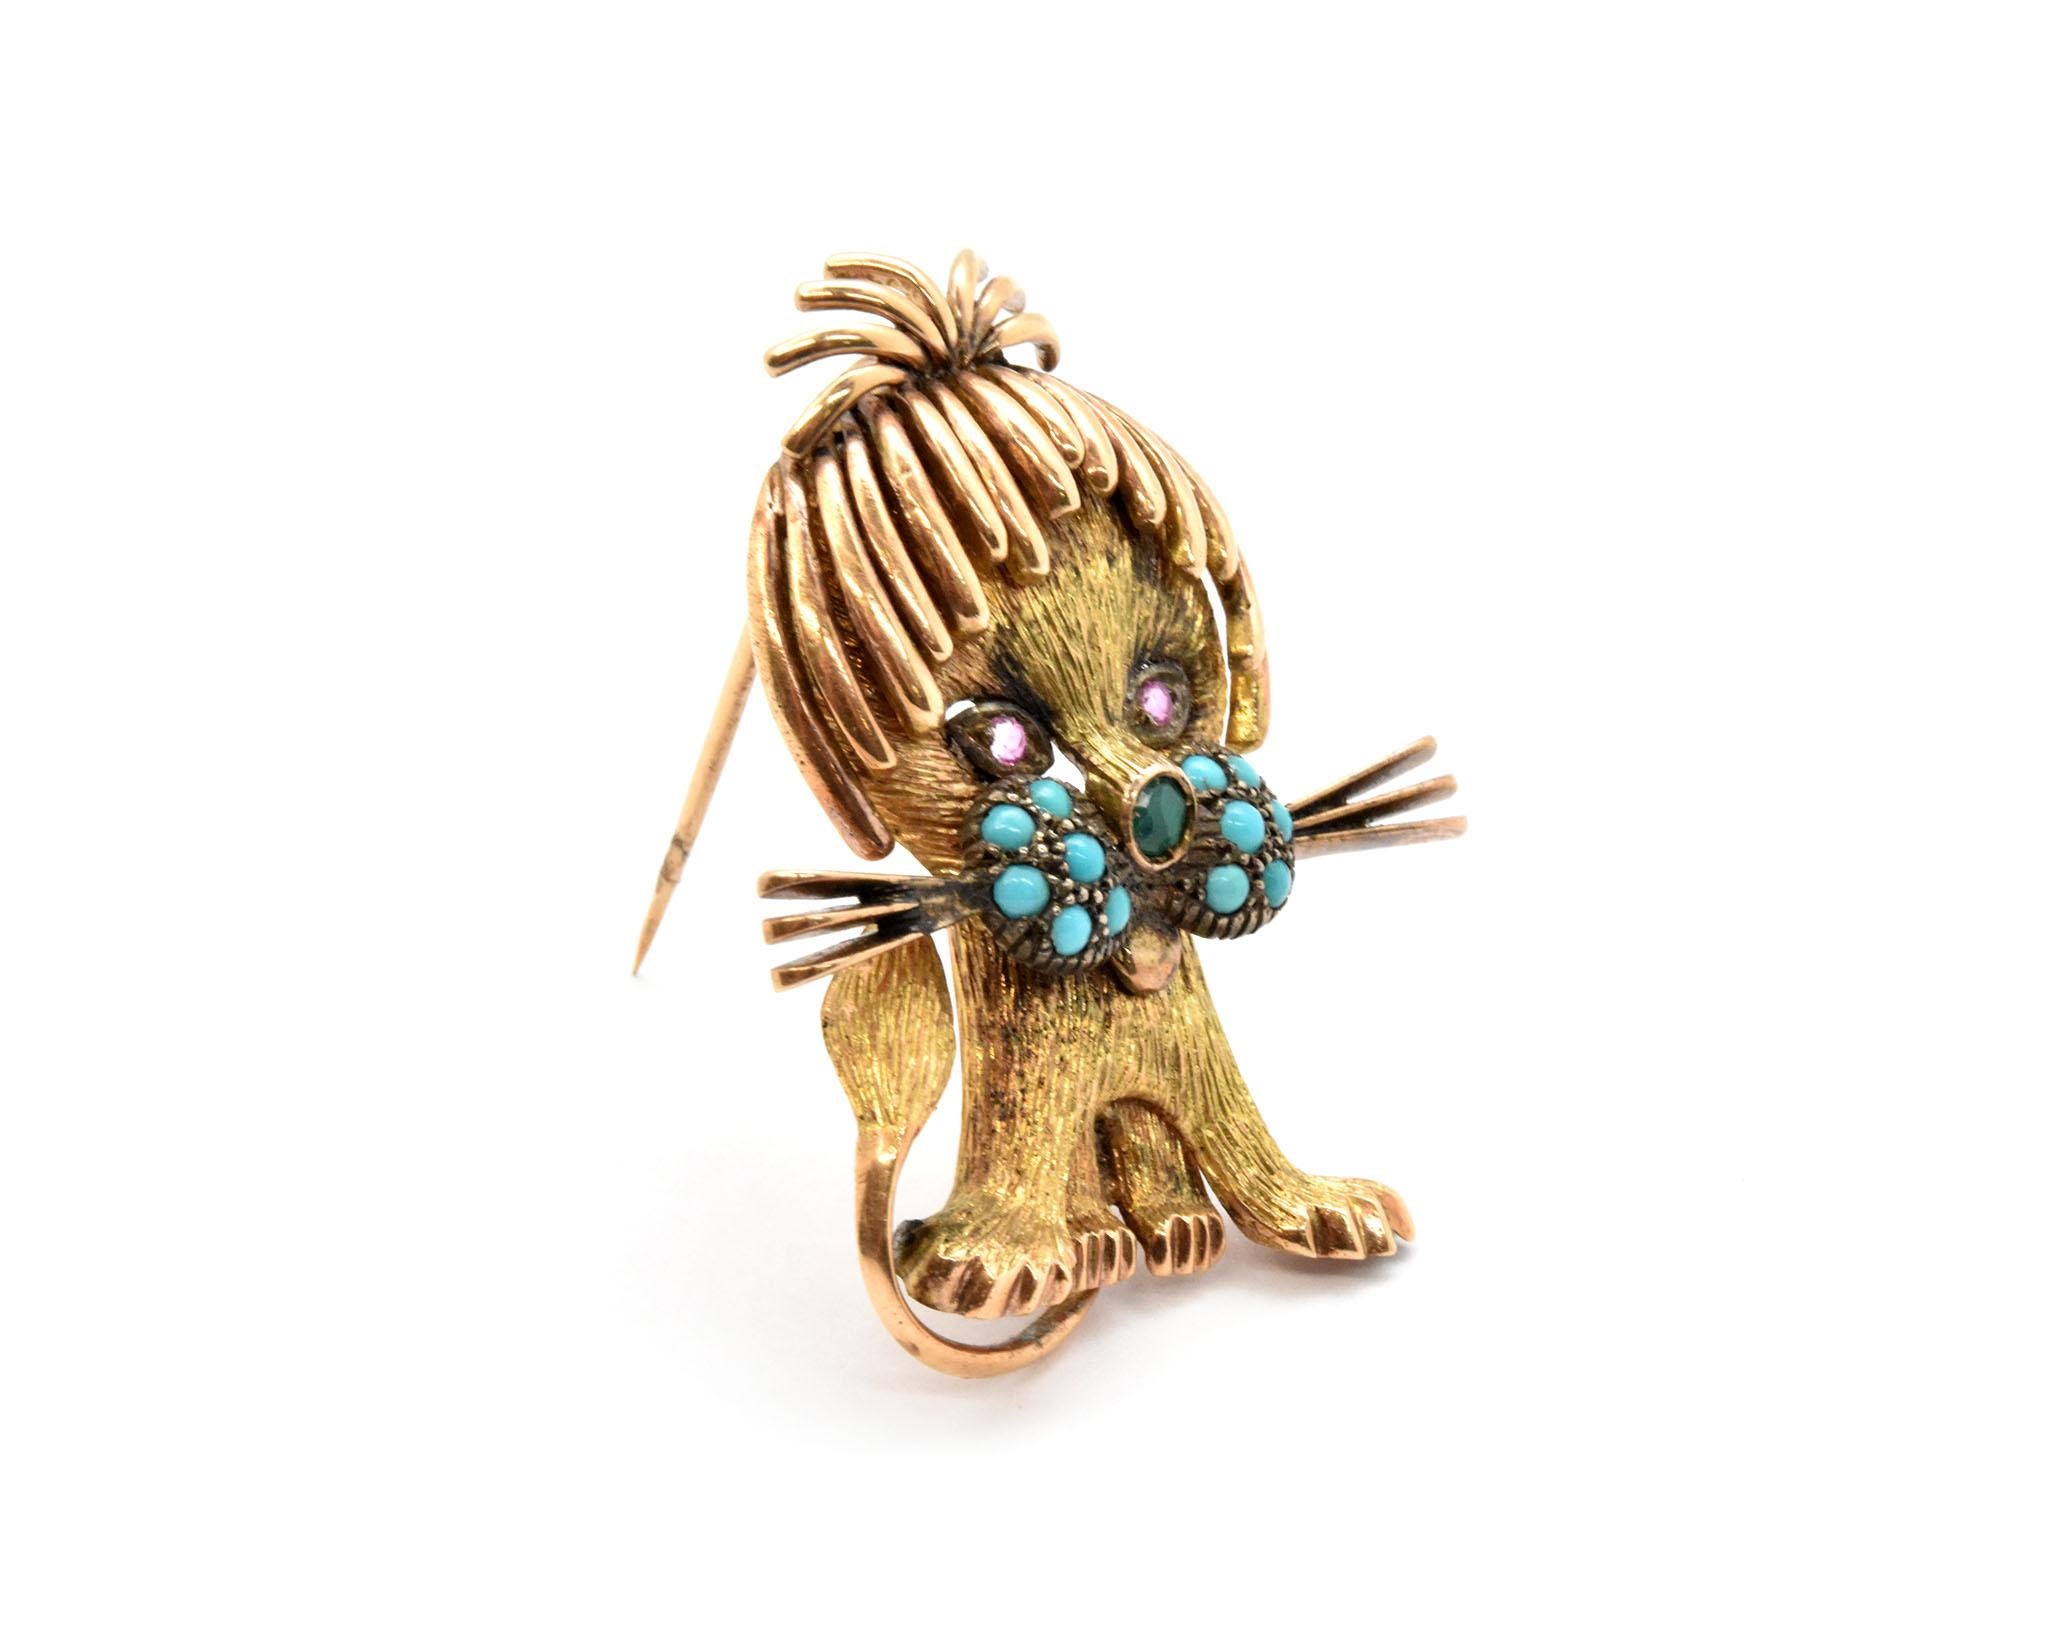 This brooch is made in 14k yellow gold with a 14k rose gold mane. The cat features turquoise beads on his cheeks, and his nose is one emerald. Finally, his eyes are set with single pink sapphires. The brooch measures 41x32mm, and it weighs 13.8